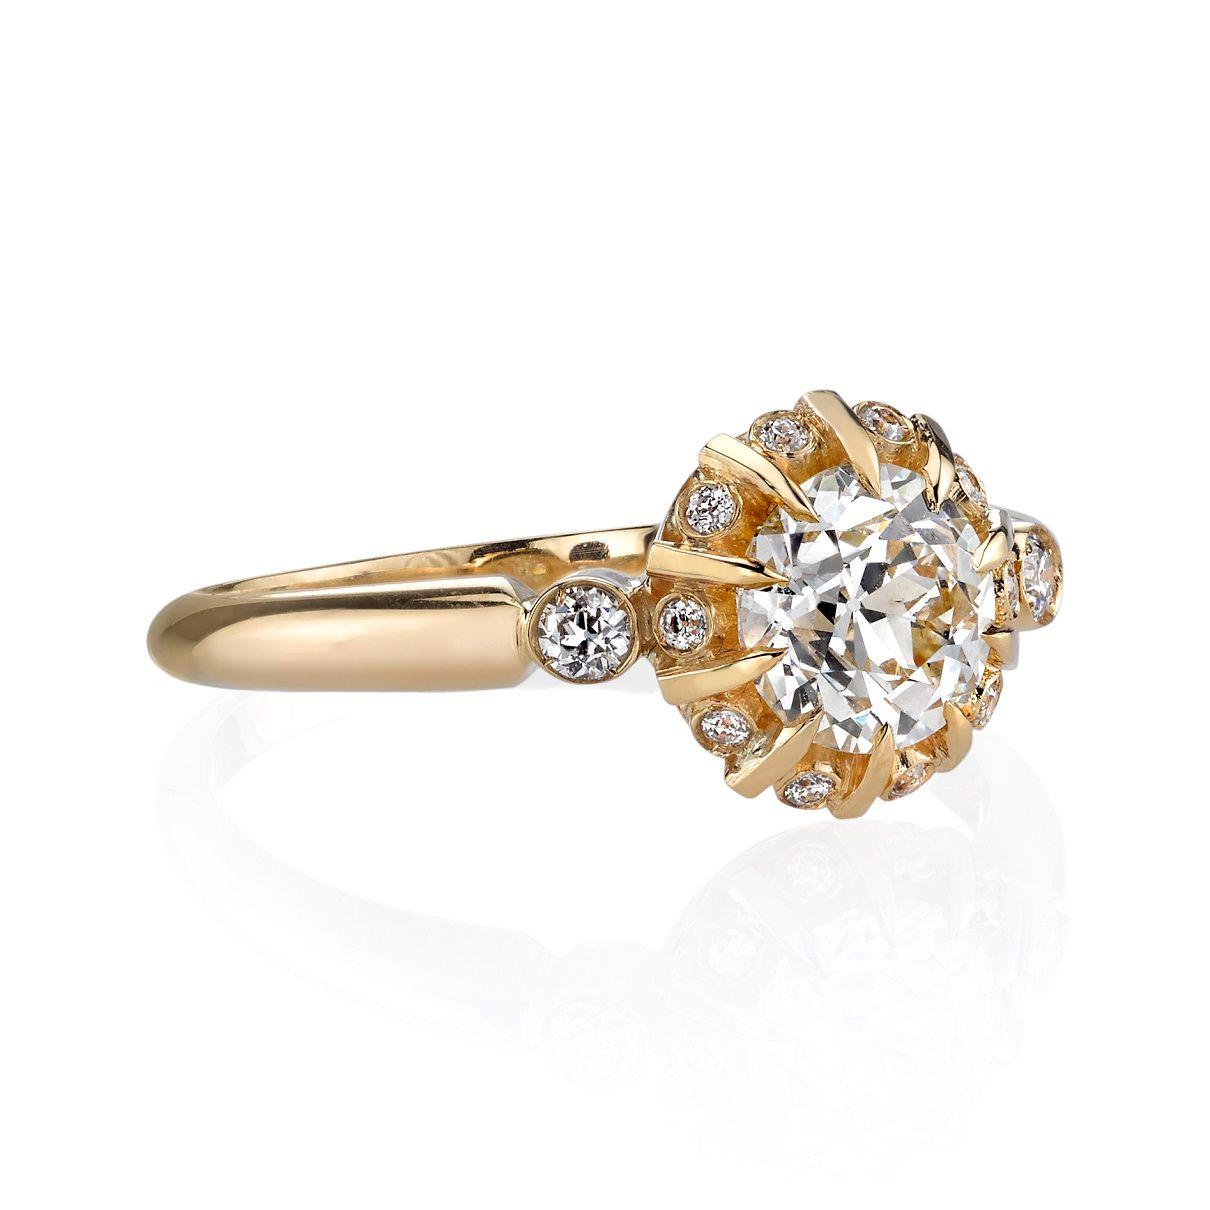 0.93ct J/VS2 GIA certified old European cut diamond with 0.11ctw old European cut diamond accents set in a handcrafted 18K yellow gold mounting.